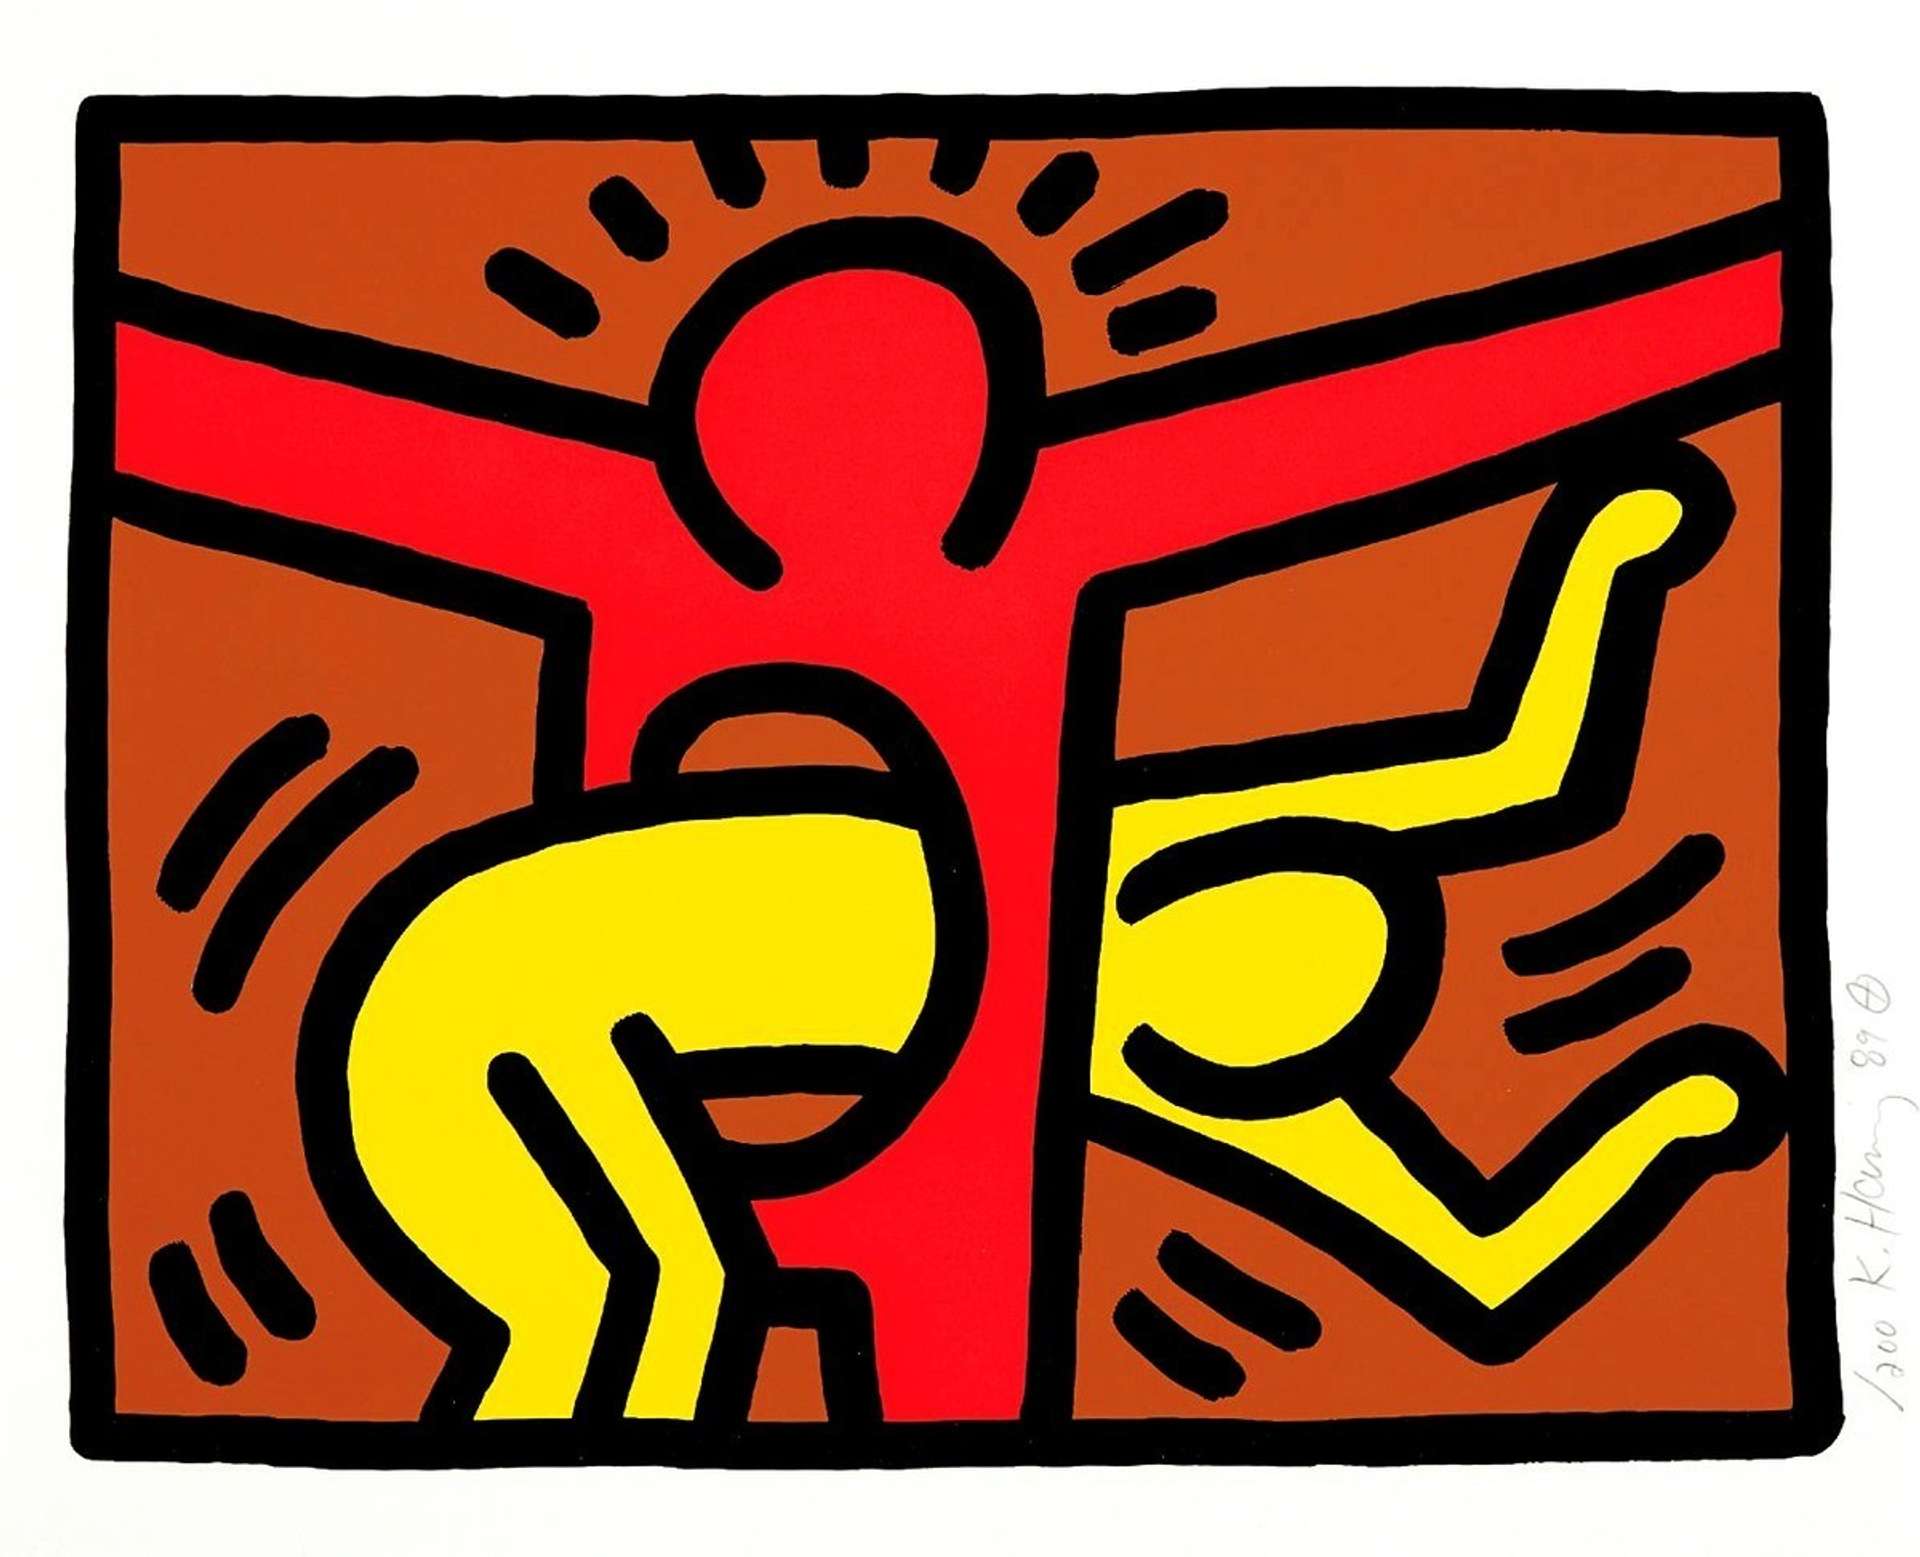 Pop Shop IV, Plate II by Keith Haring